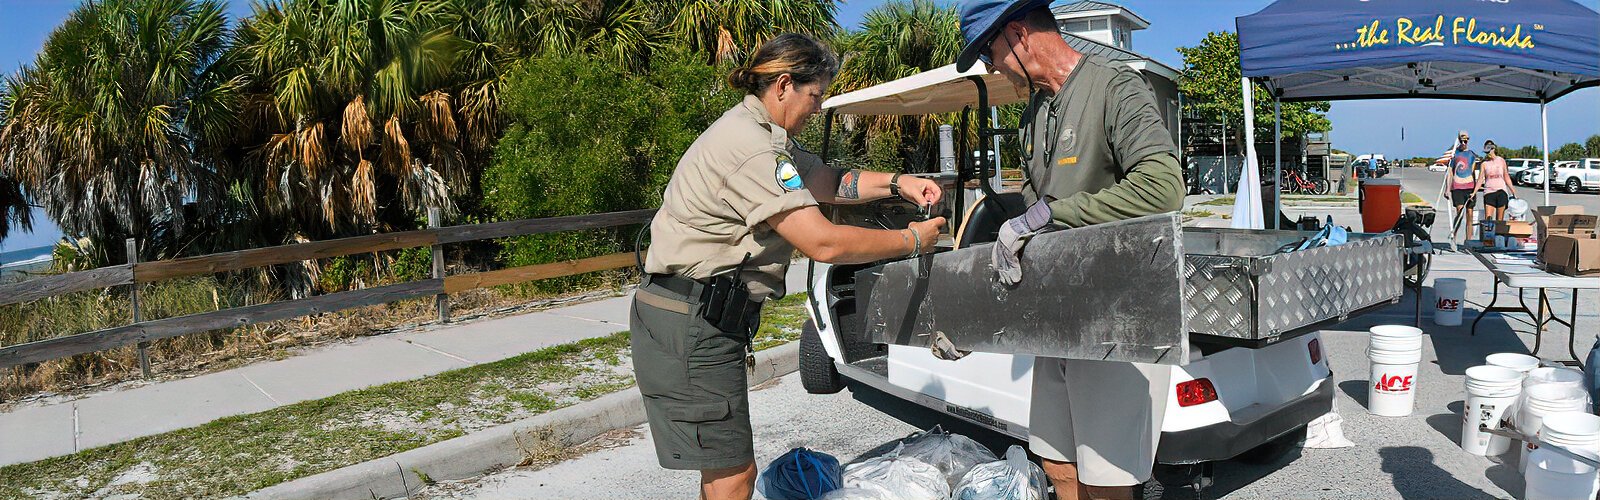 Park ranger and event coordinator Beth Reynolds attempts to weigh a six-foot-long, nail-studded plank that volunteer Randy discovered on the beach during International Coastal Cleanup Day.